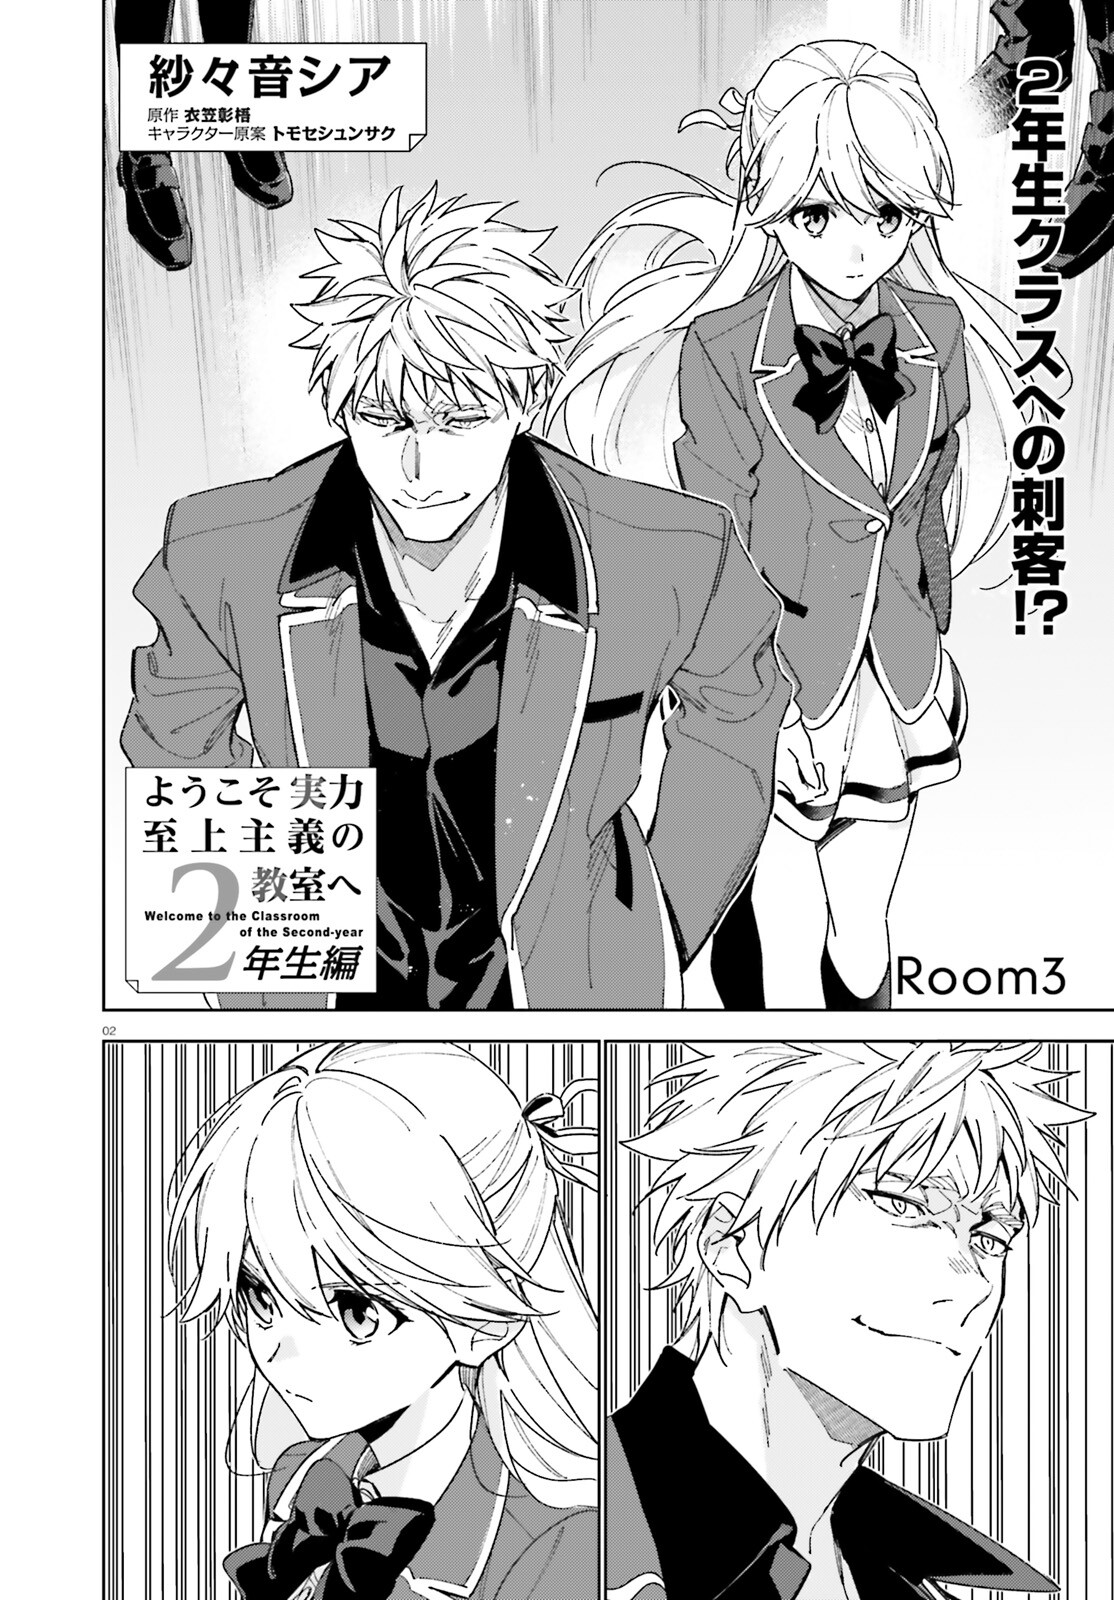 Classroom of the Elite – 2nd Year, Chapter 3 - Classroom of the